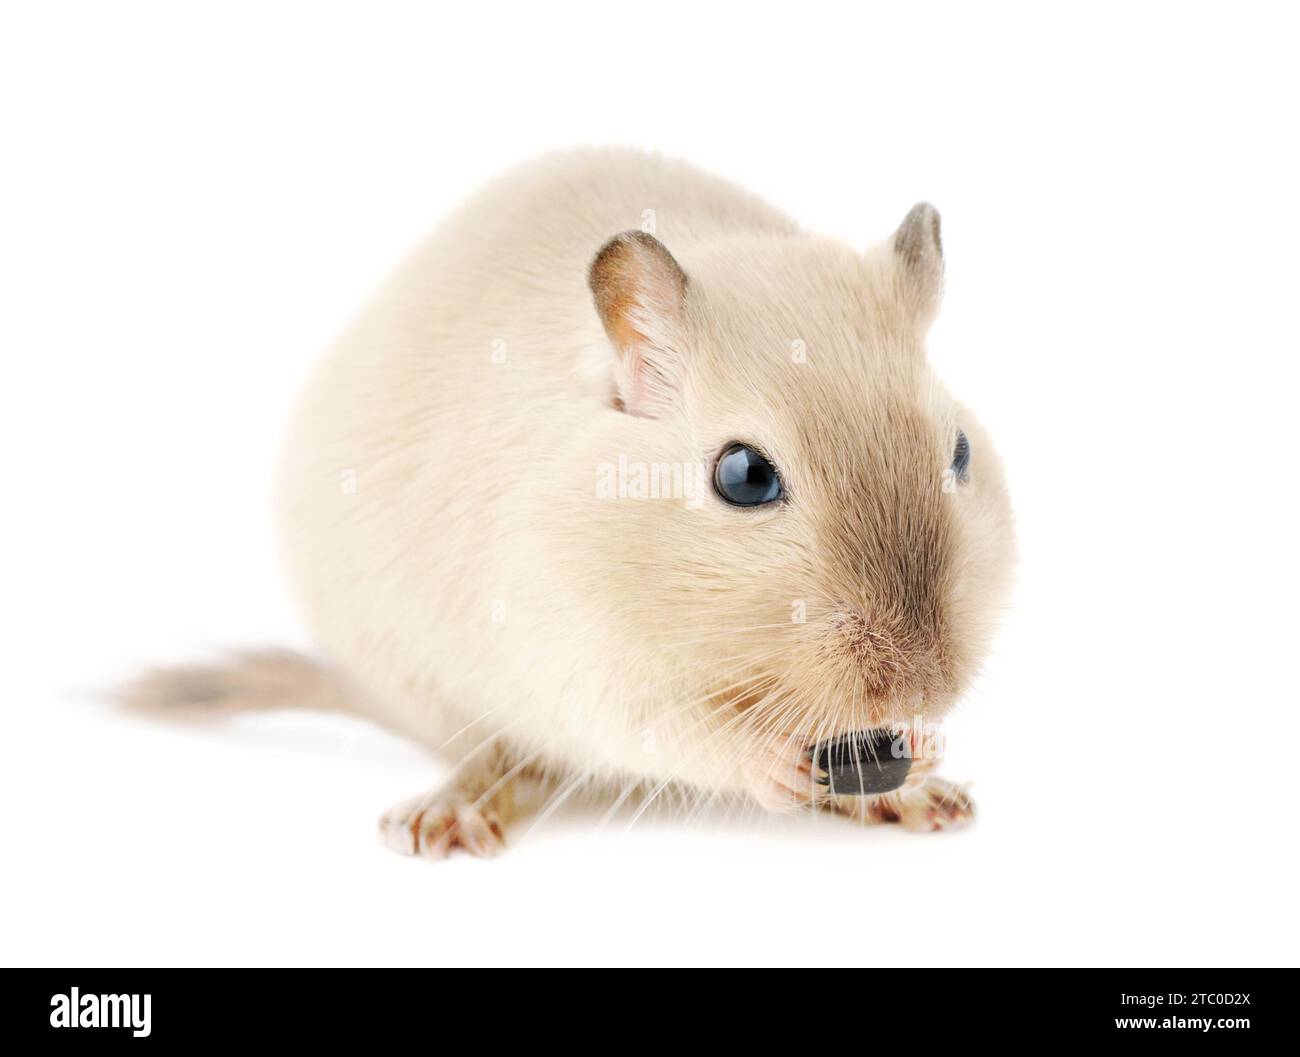 Cute Siamese pet gerbil nibbling on a seed, isolated on white background Stock Photo